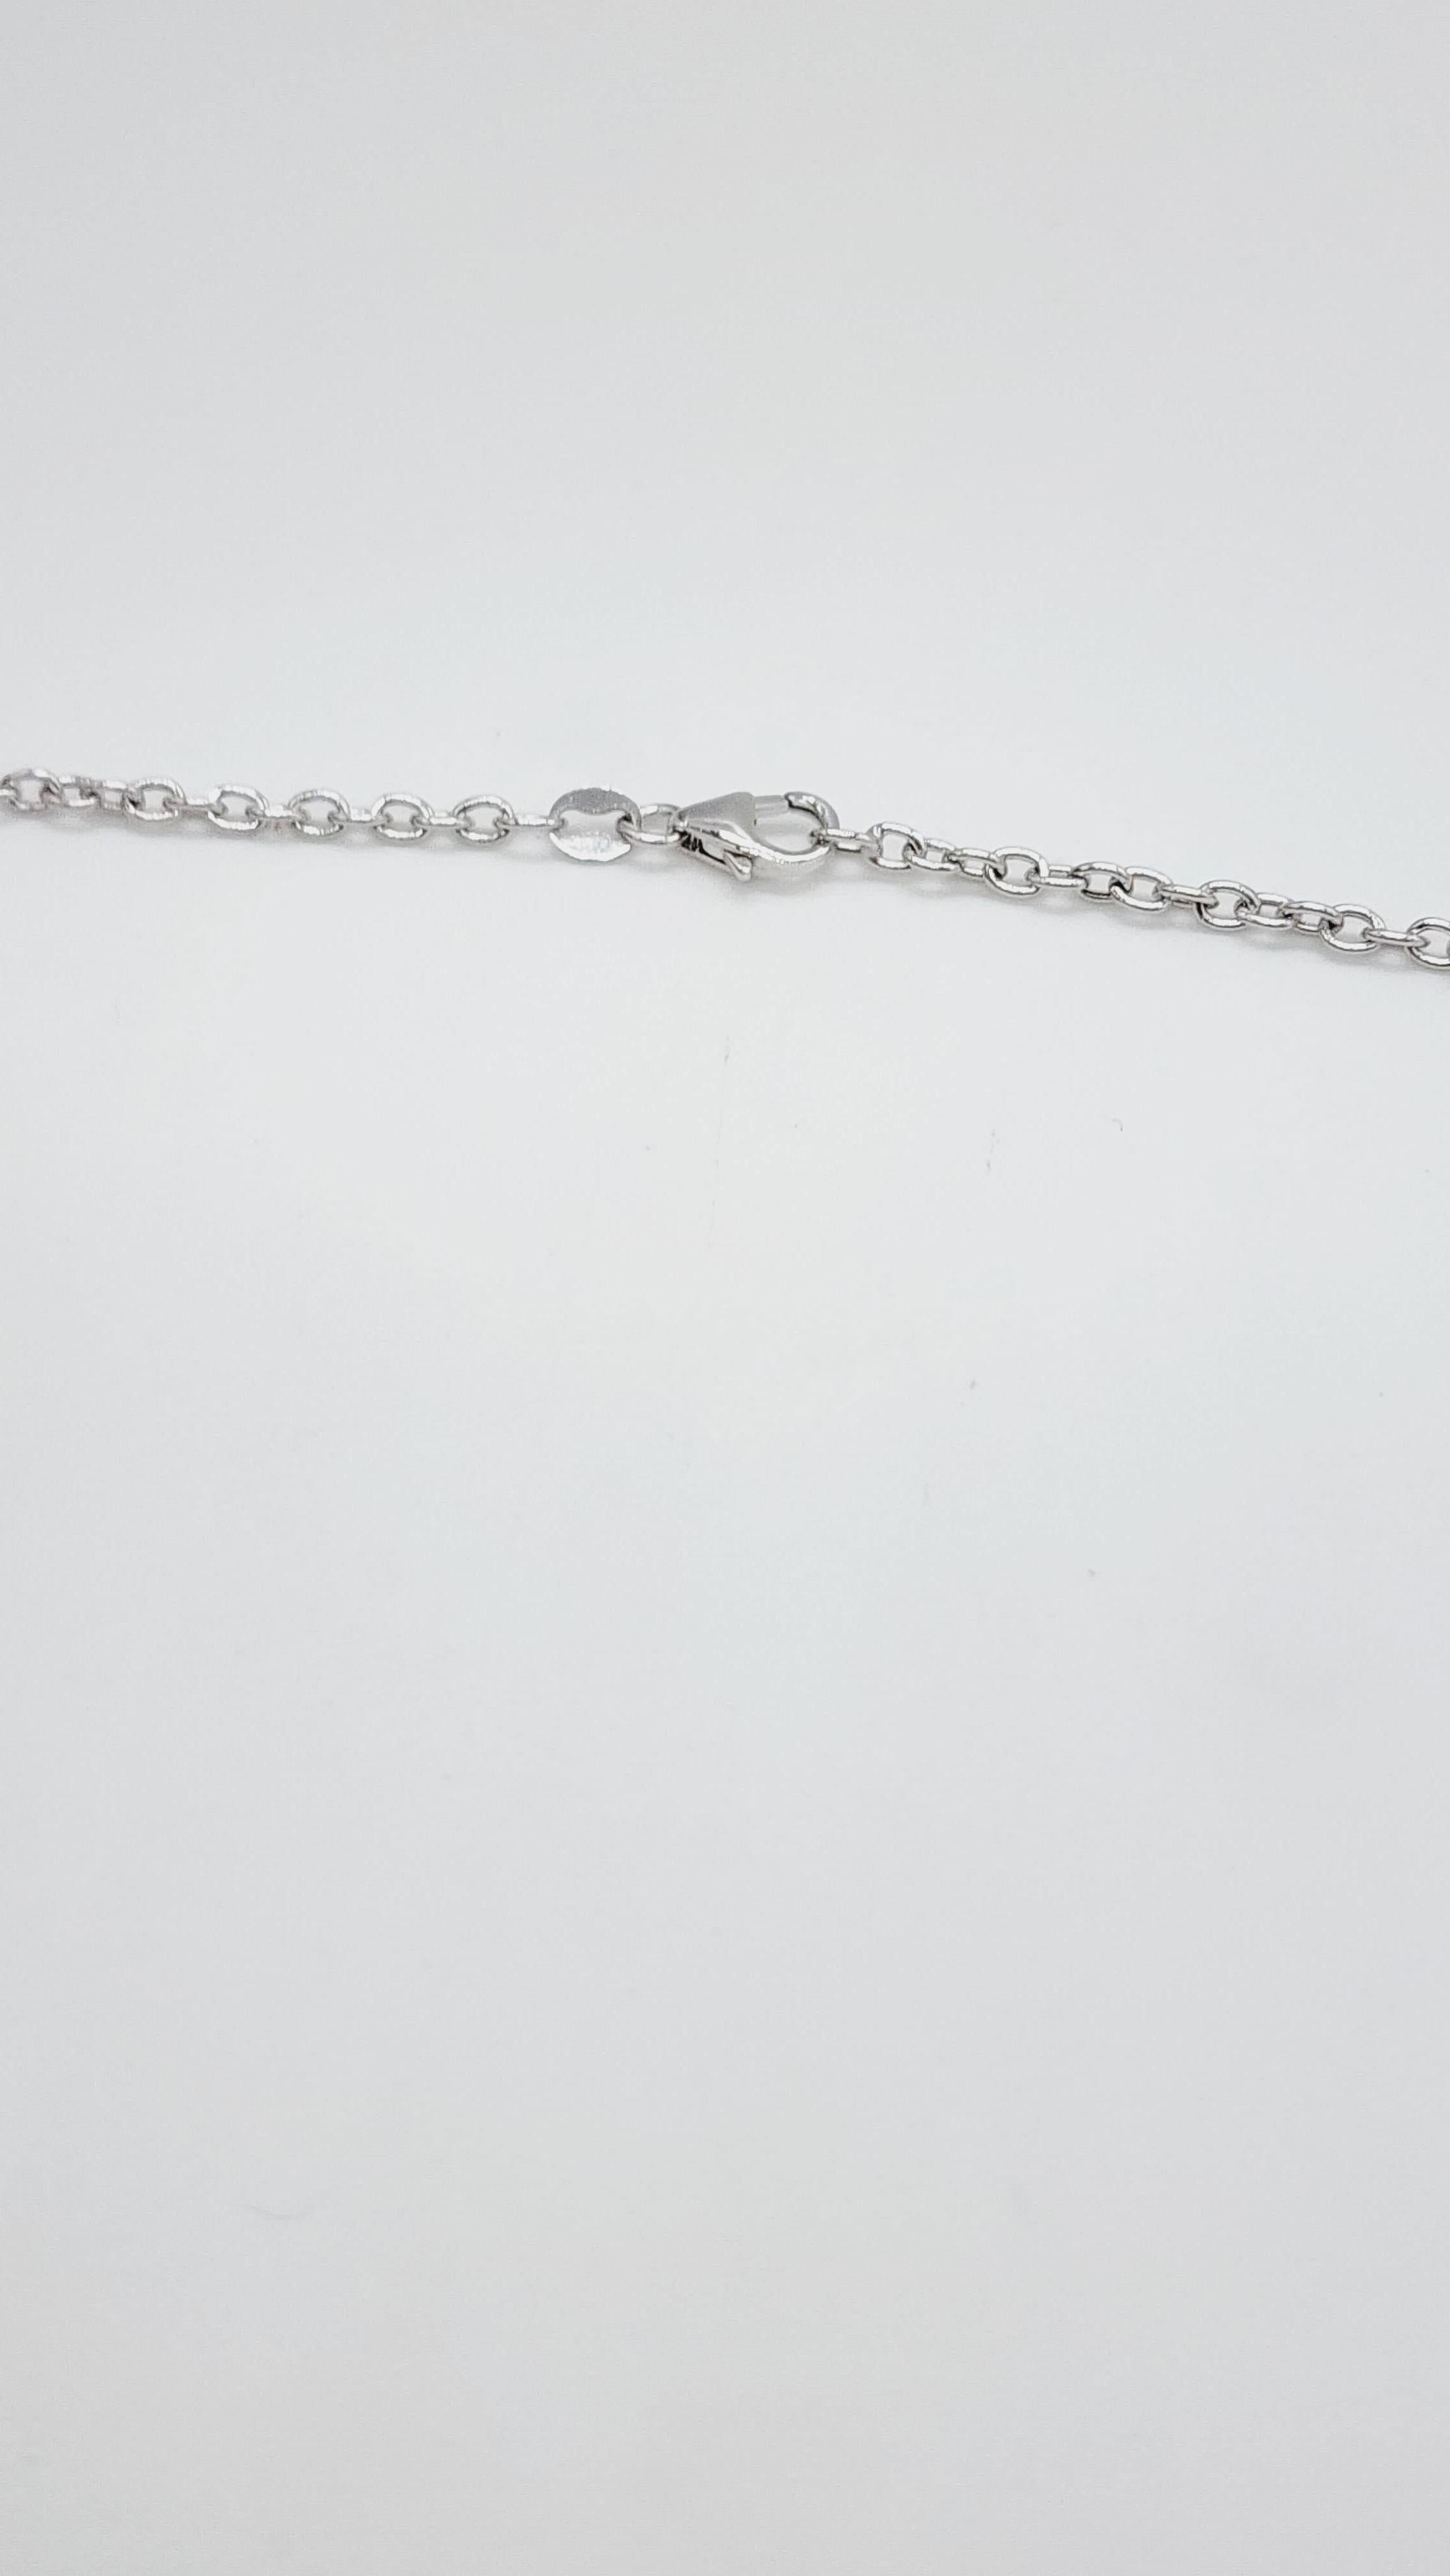 average length of a necklace chain